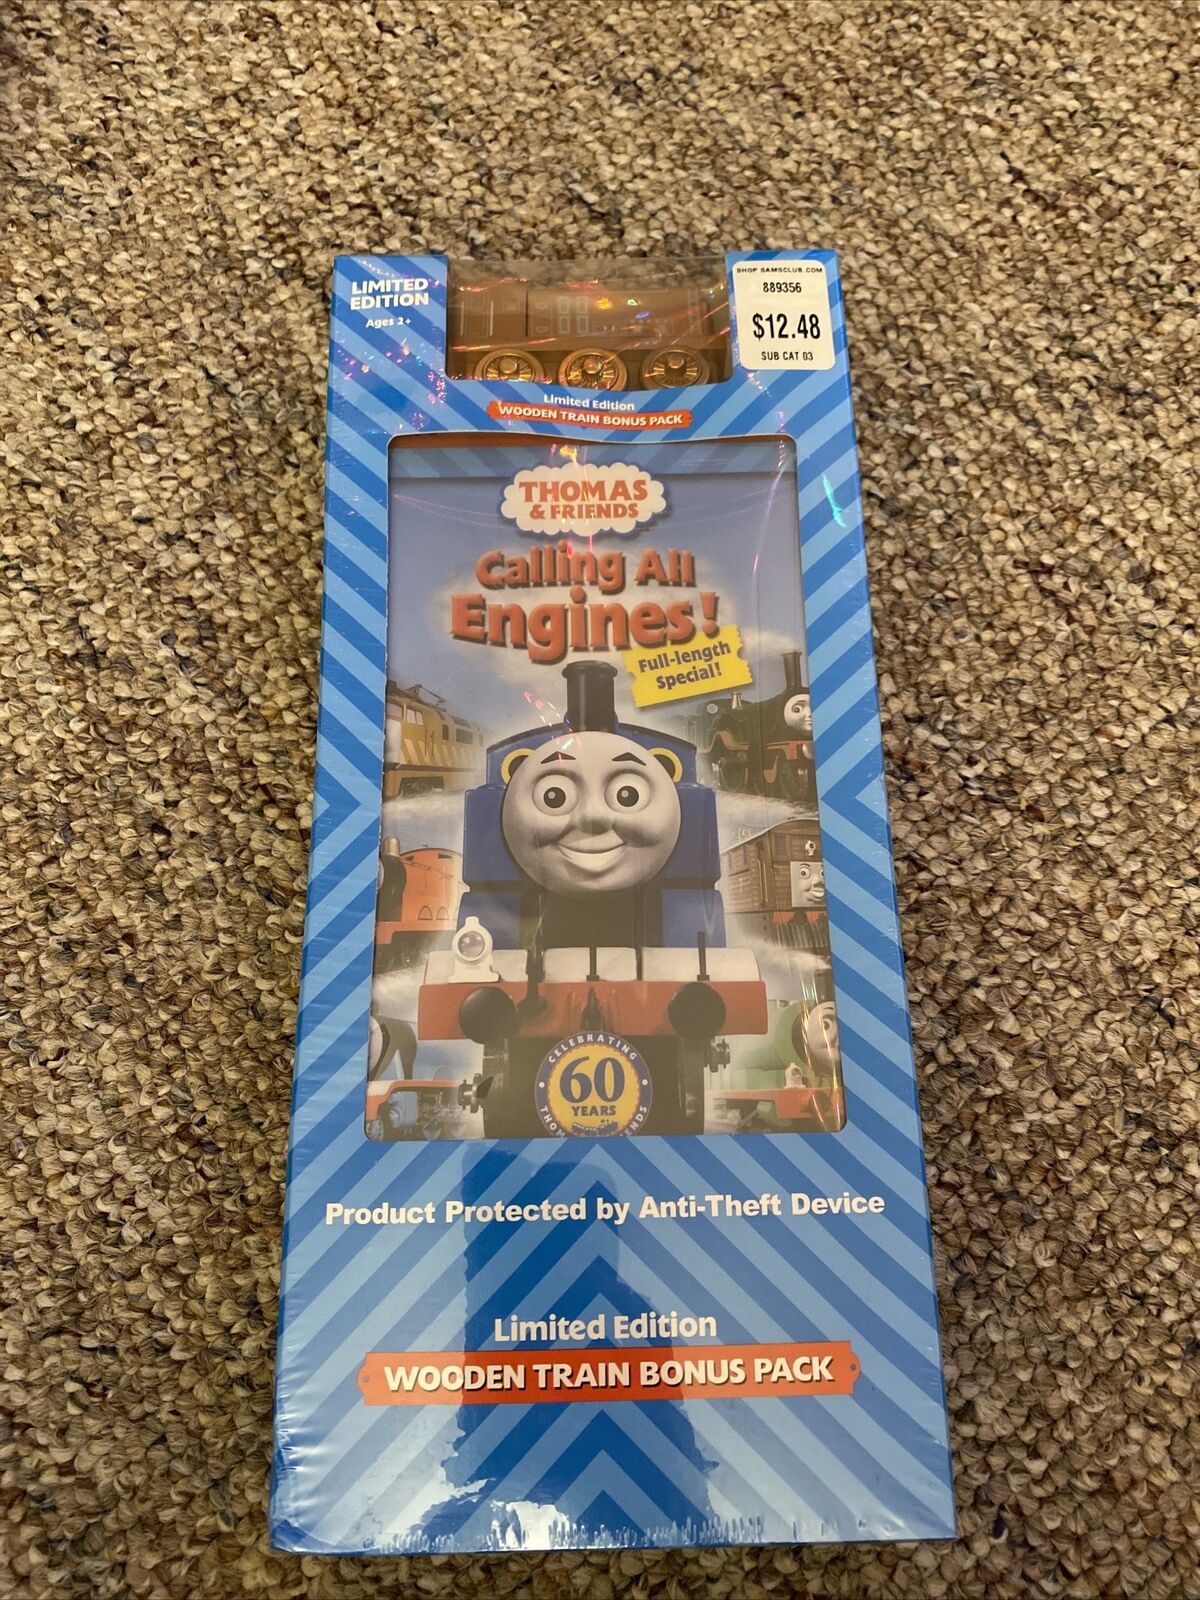 Calling All Engines DVD with Bronze Diesel by Jack1set2 on DeviantArt